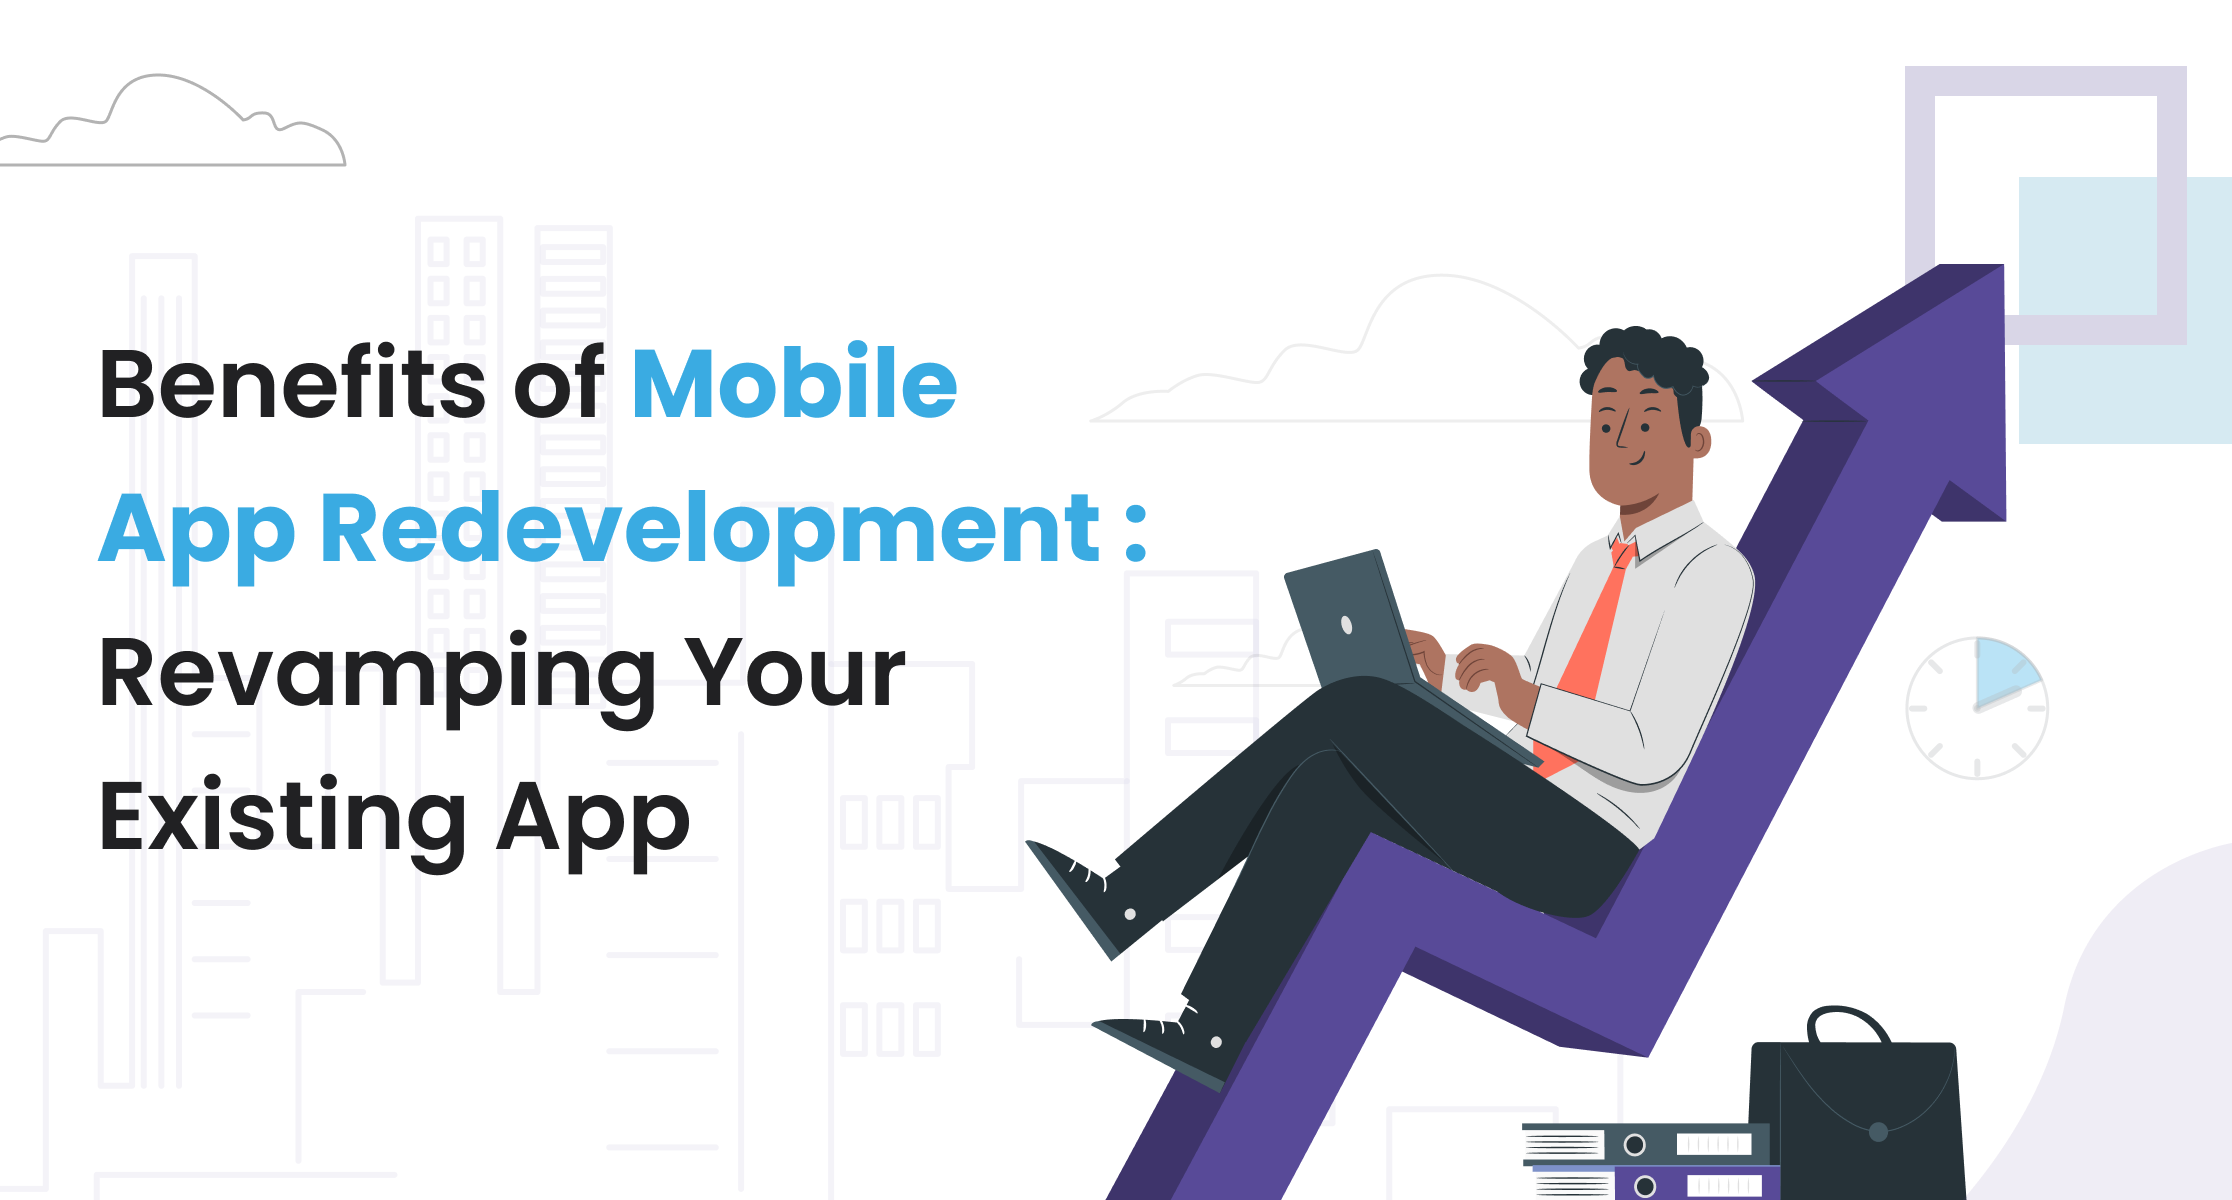 Benefits of Mobile App Redevelopment: Revamping Your Existing App